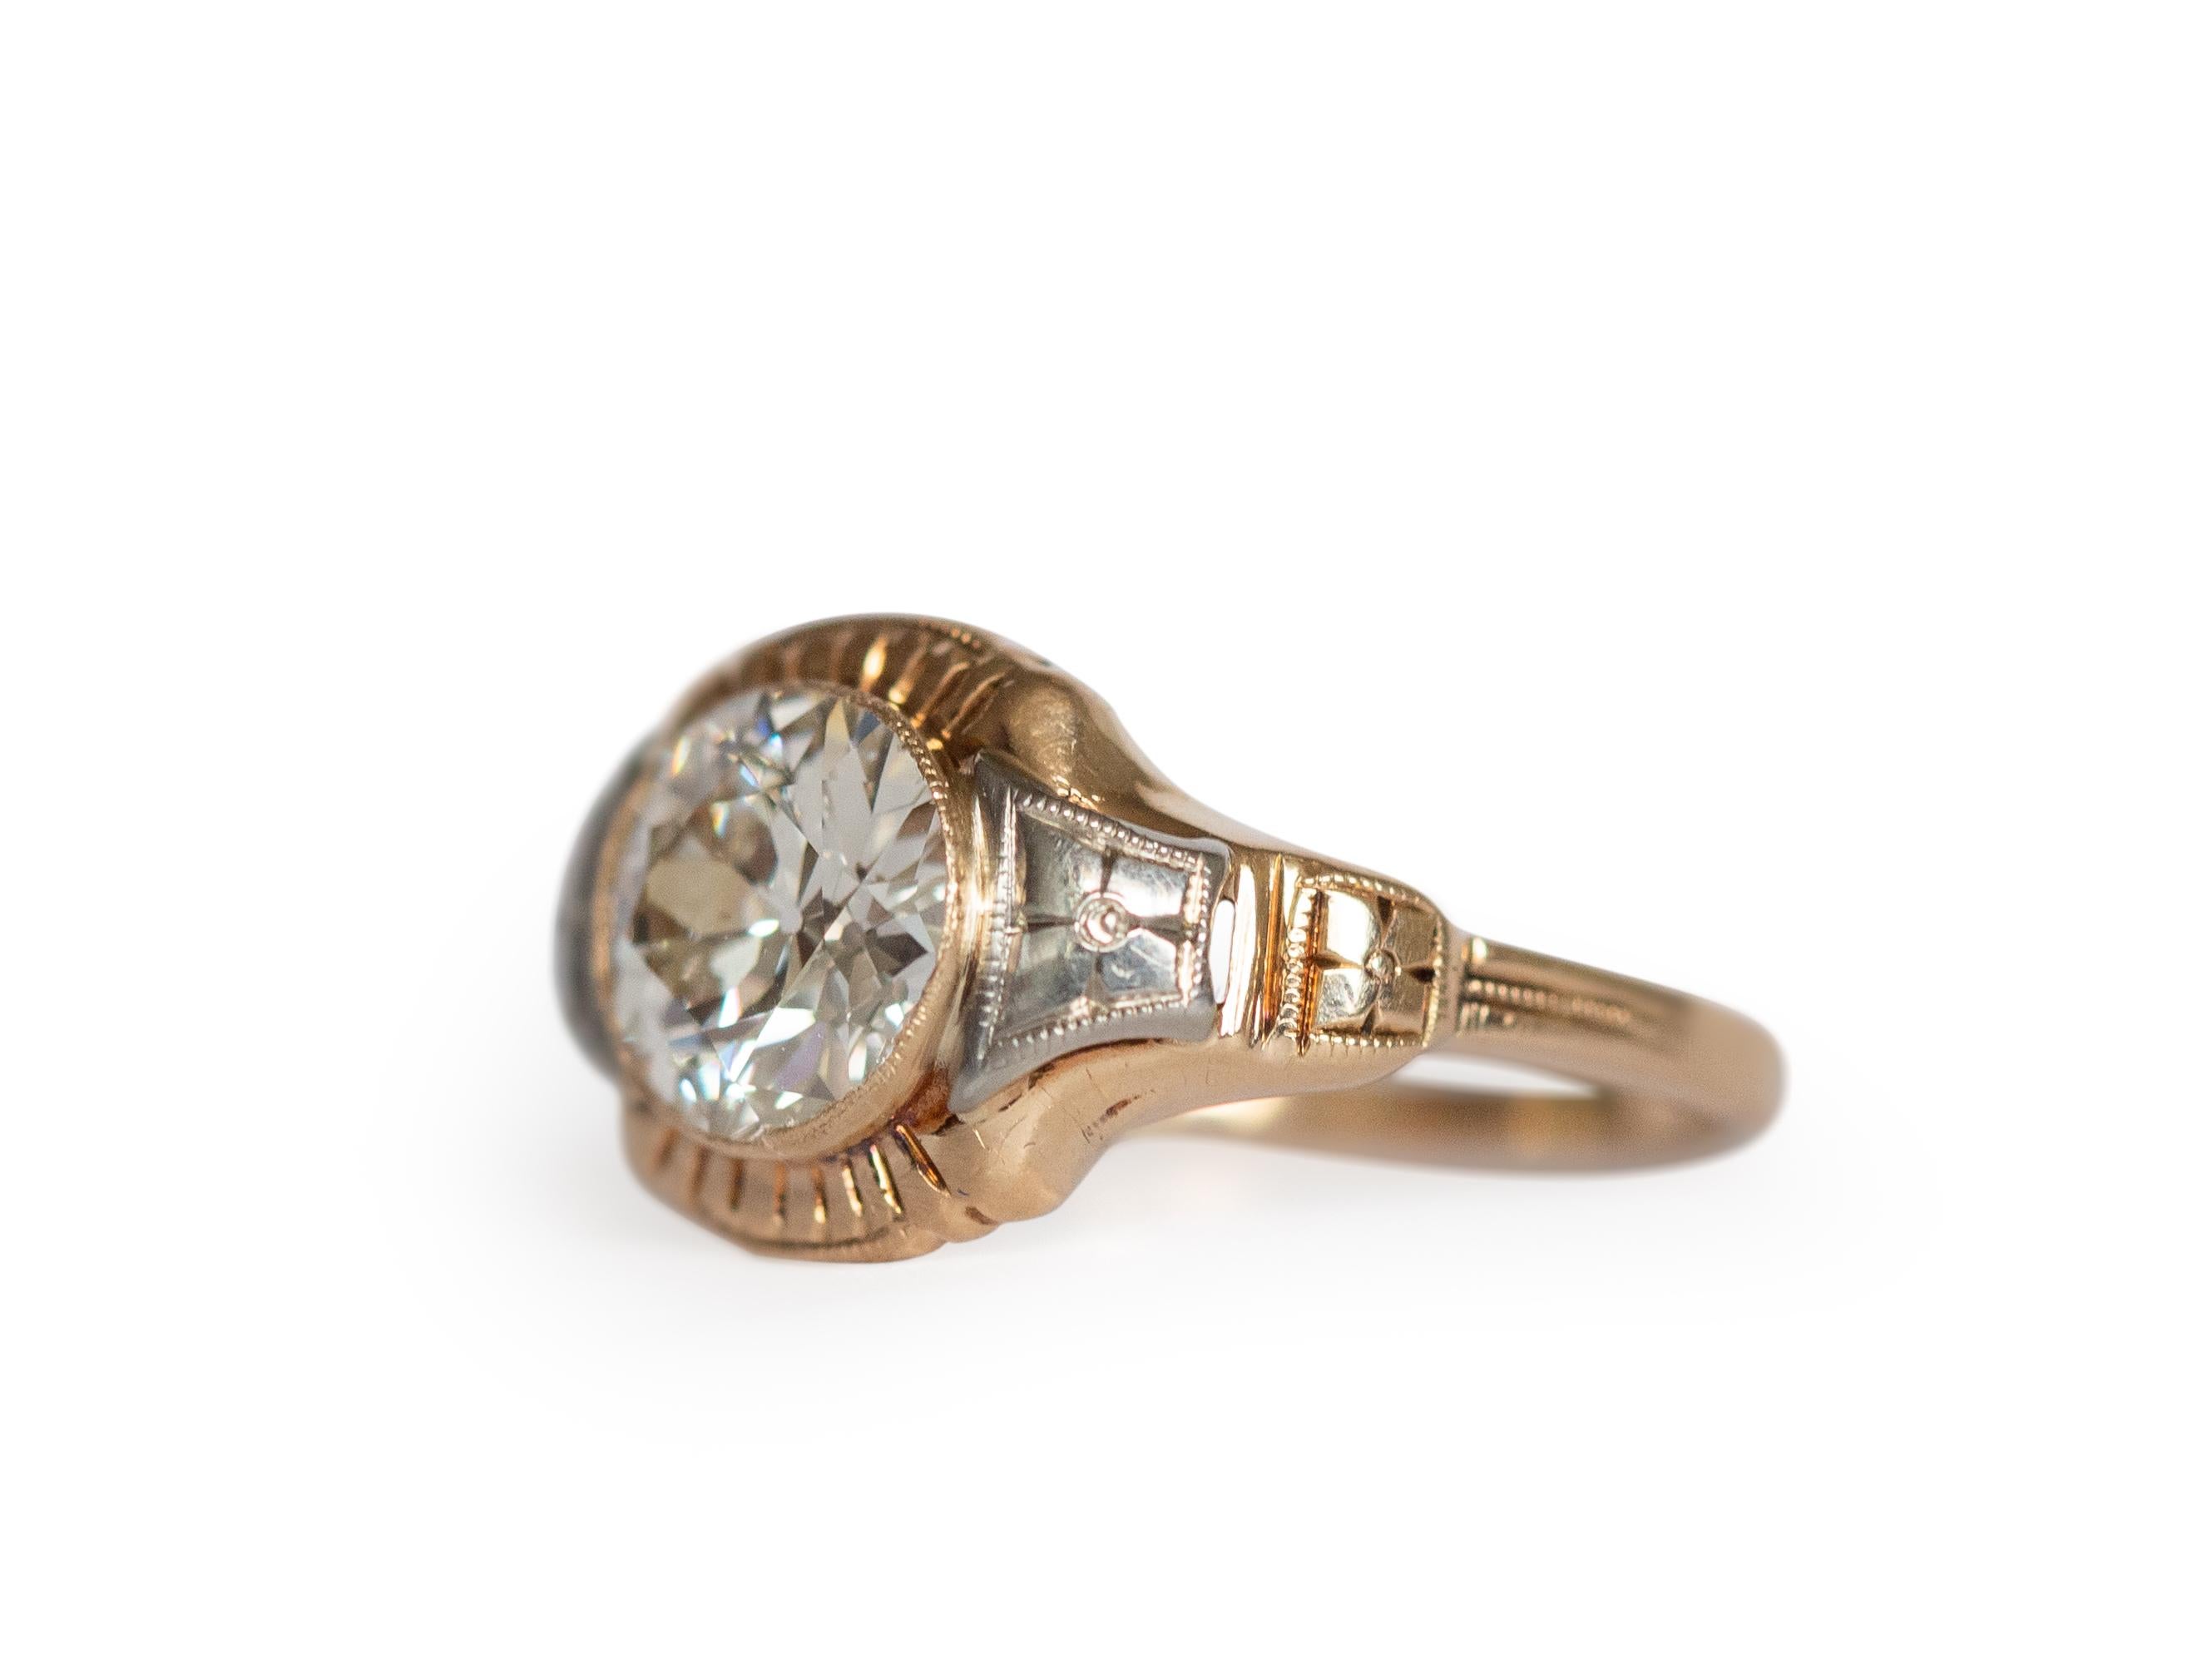 Ring Size: 5.25
Metal Type: 14k Yellow Gold & Plat  [Hallmarked, and Tested]
Weight:  2.55 grams

Center Diamond Details:
GIA REPORT#: 1216086207
Weight: 1.34 carat
Cut: Old European Brilliant
Color: K
Clarity: VS2

Finger to Top of Stone